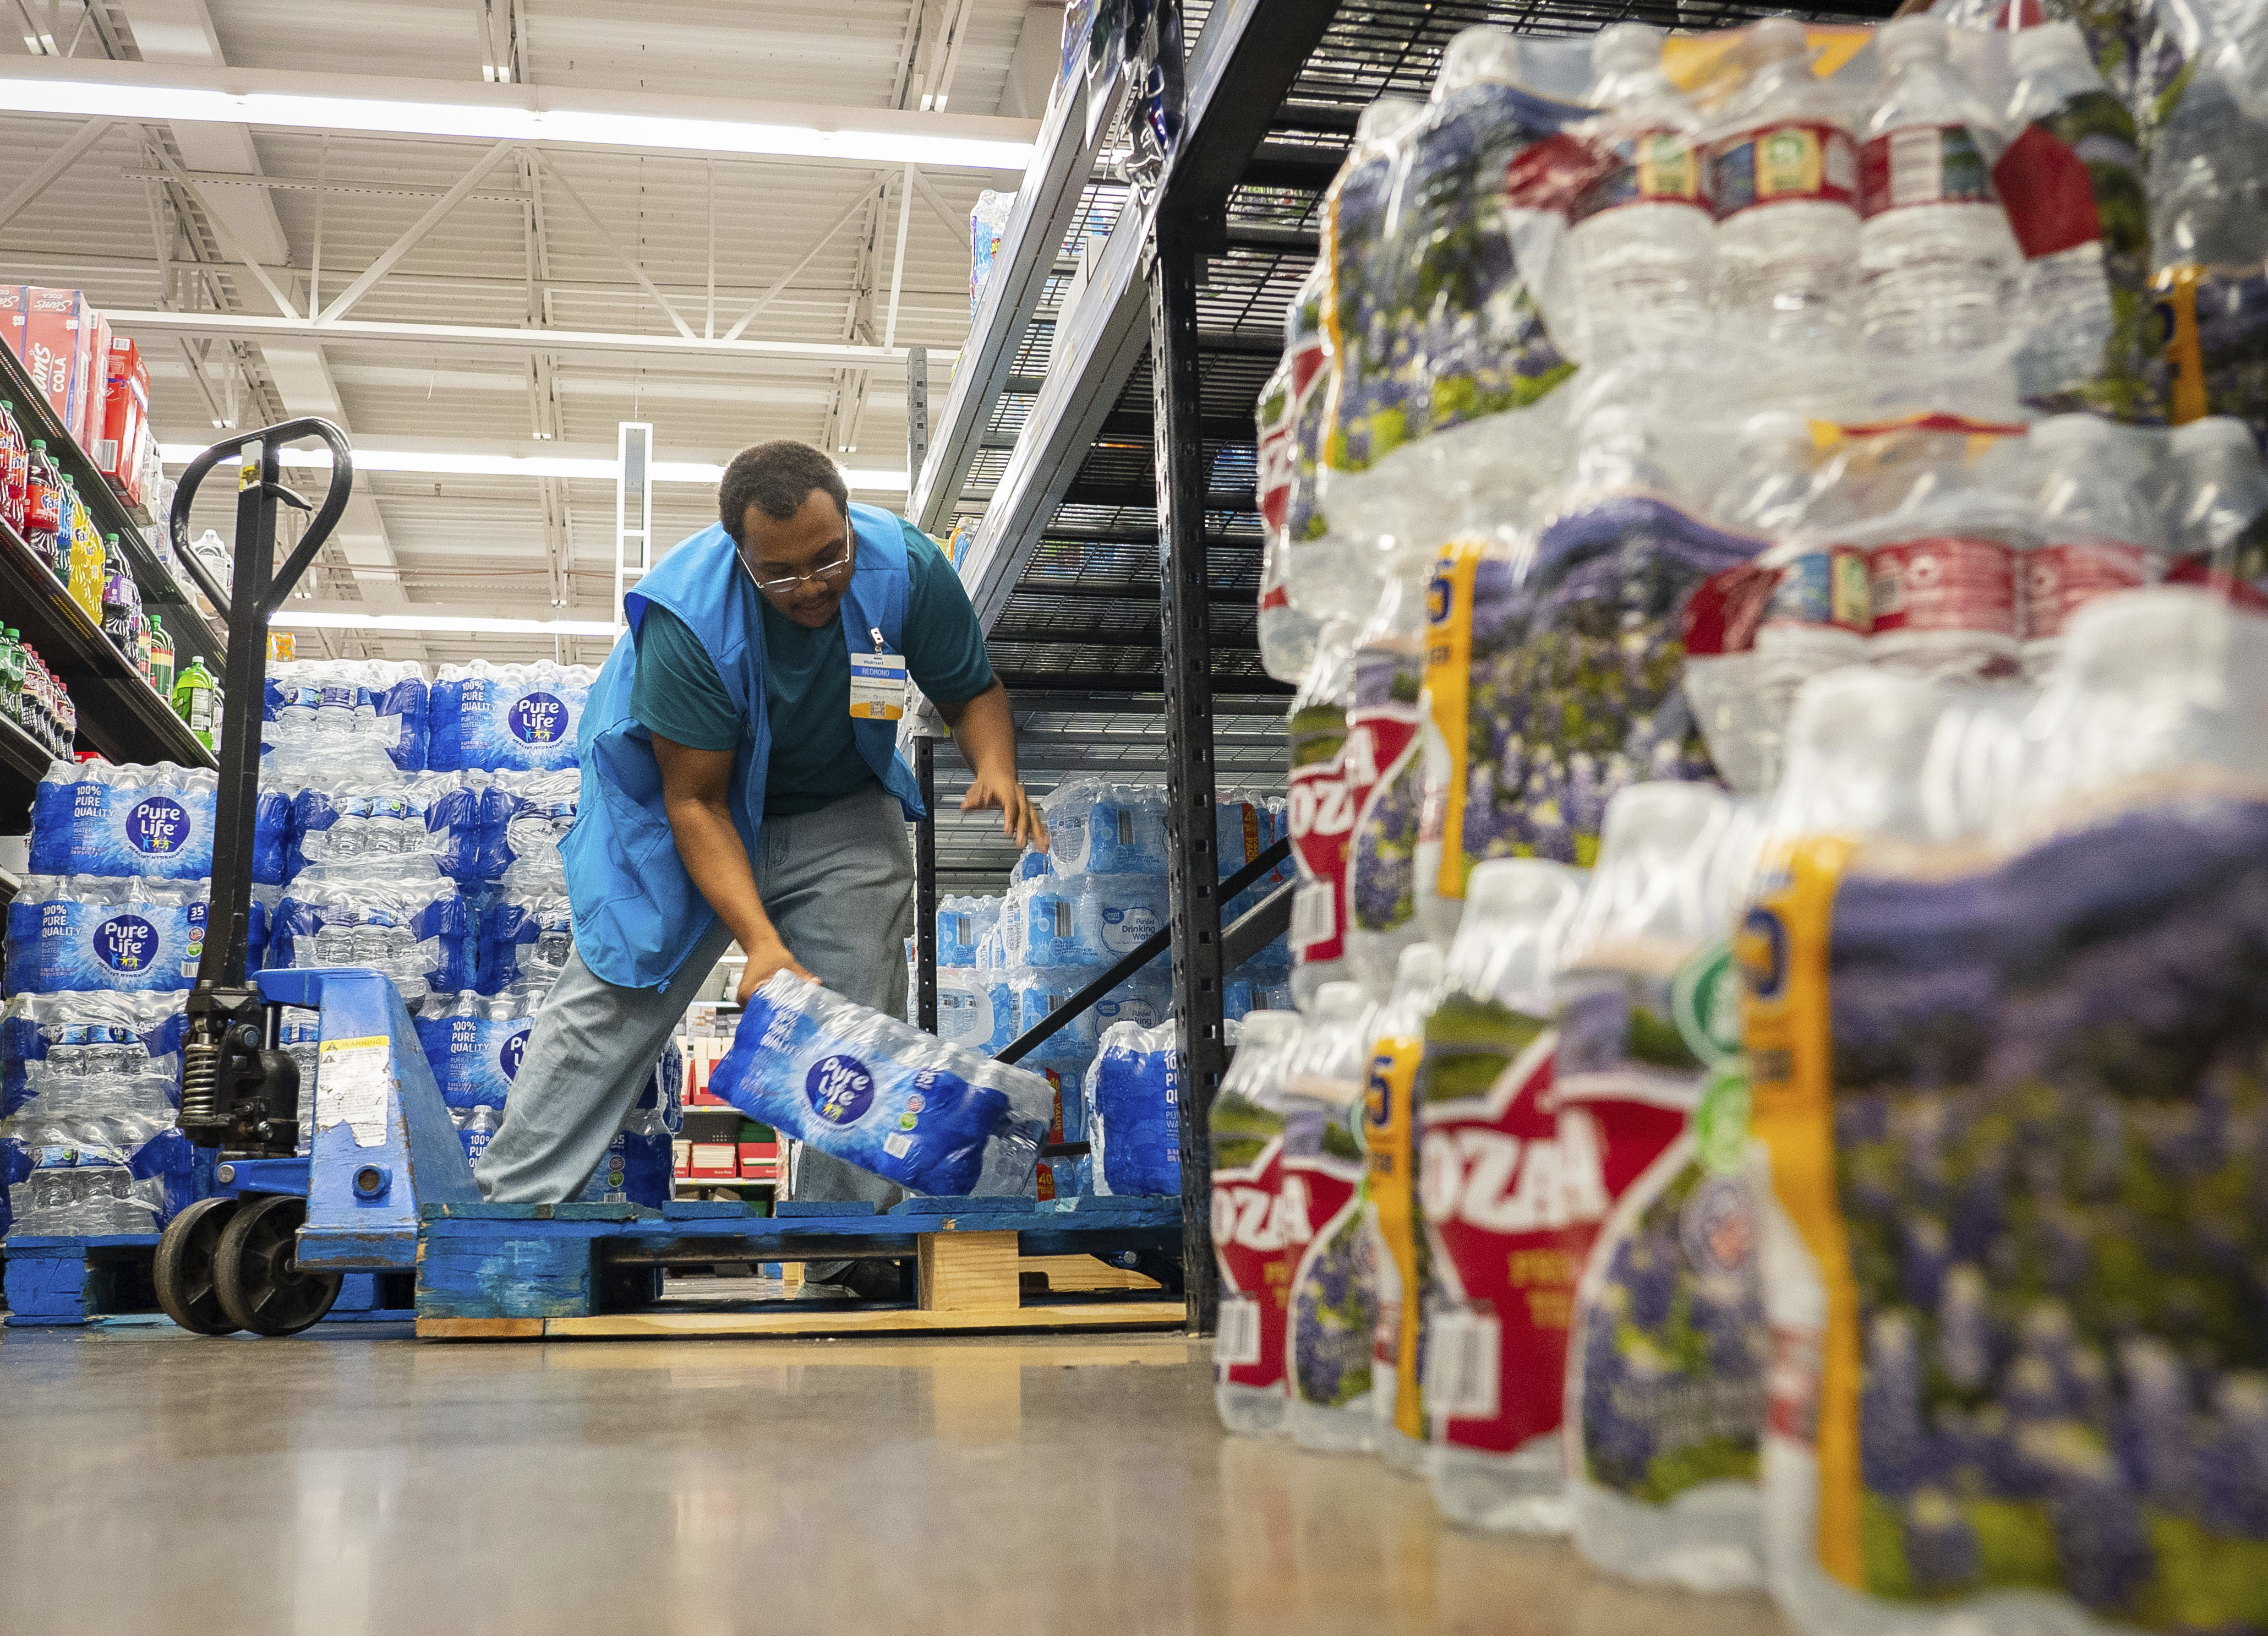 Walmart Is Putting Thousands of These Items on Sale, CEO Says